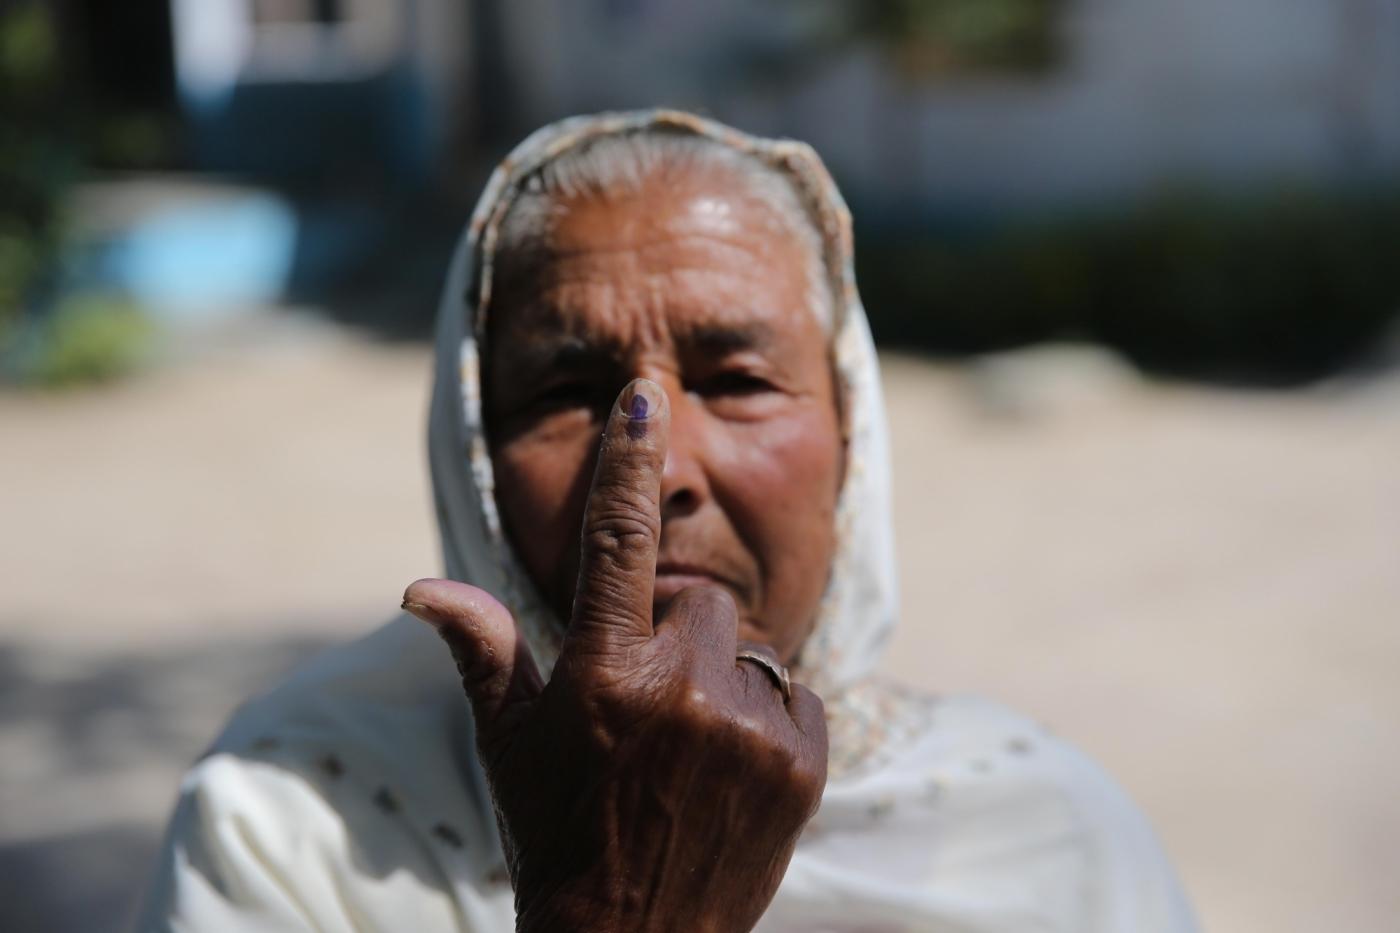 Amritsar: An elderly lady shows her forefinger marked with indelible ink after casting vote during the seventh and the last phase of 2019 Lok Sabha Elections at a polling booth in Amritsar on May 19, 2019. (Photo: IANS) by .